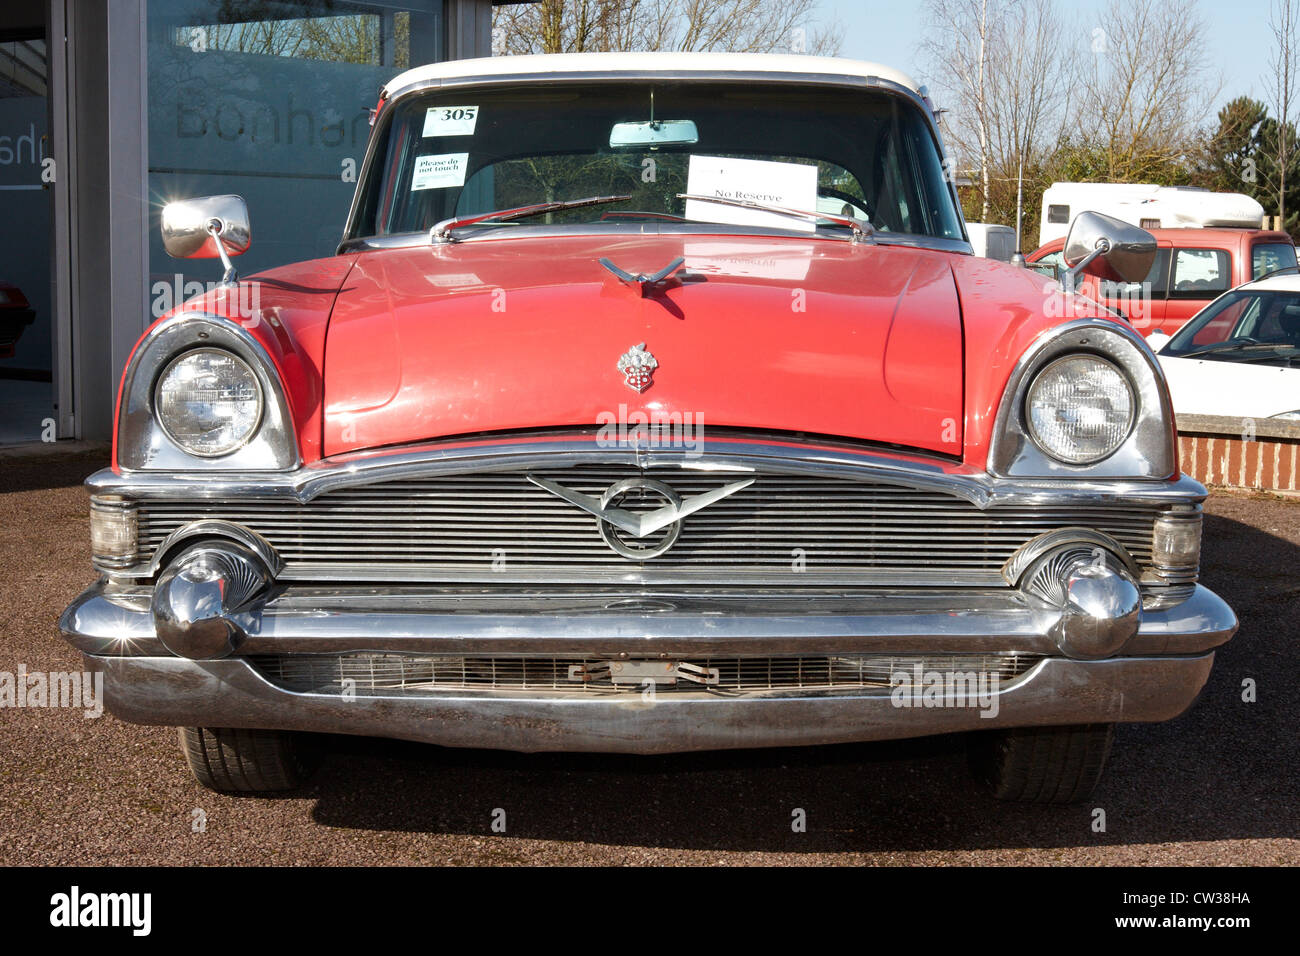 A 1956 Packard Patrician Sedan forms part of a classic car auction sale being held at Bonhams Oxford Stock Photo